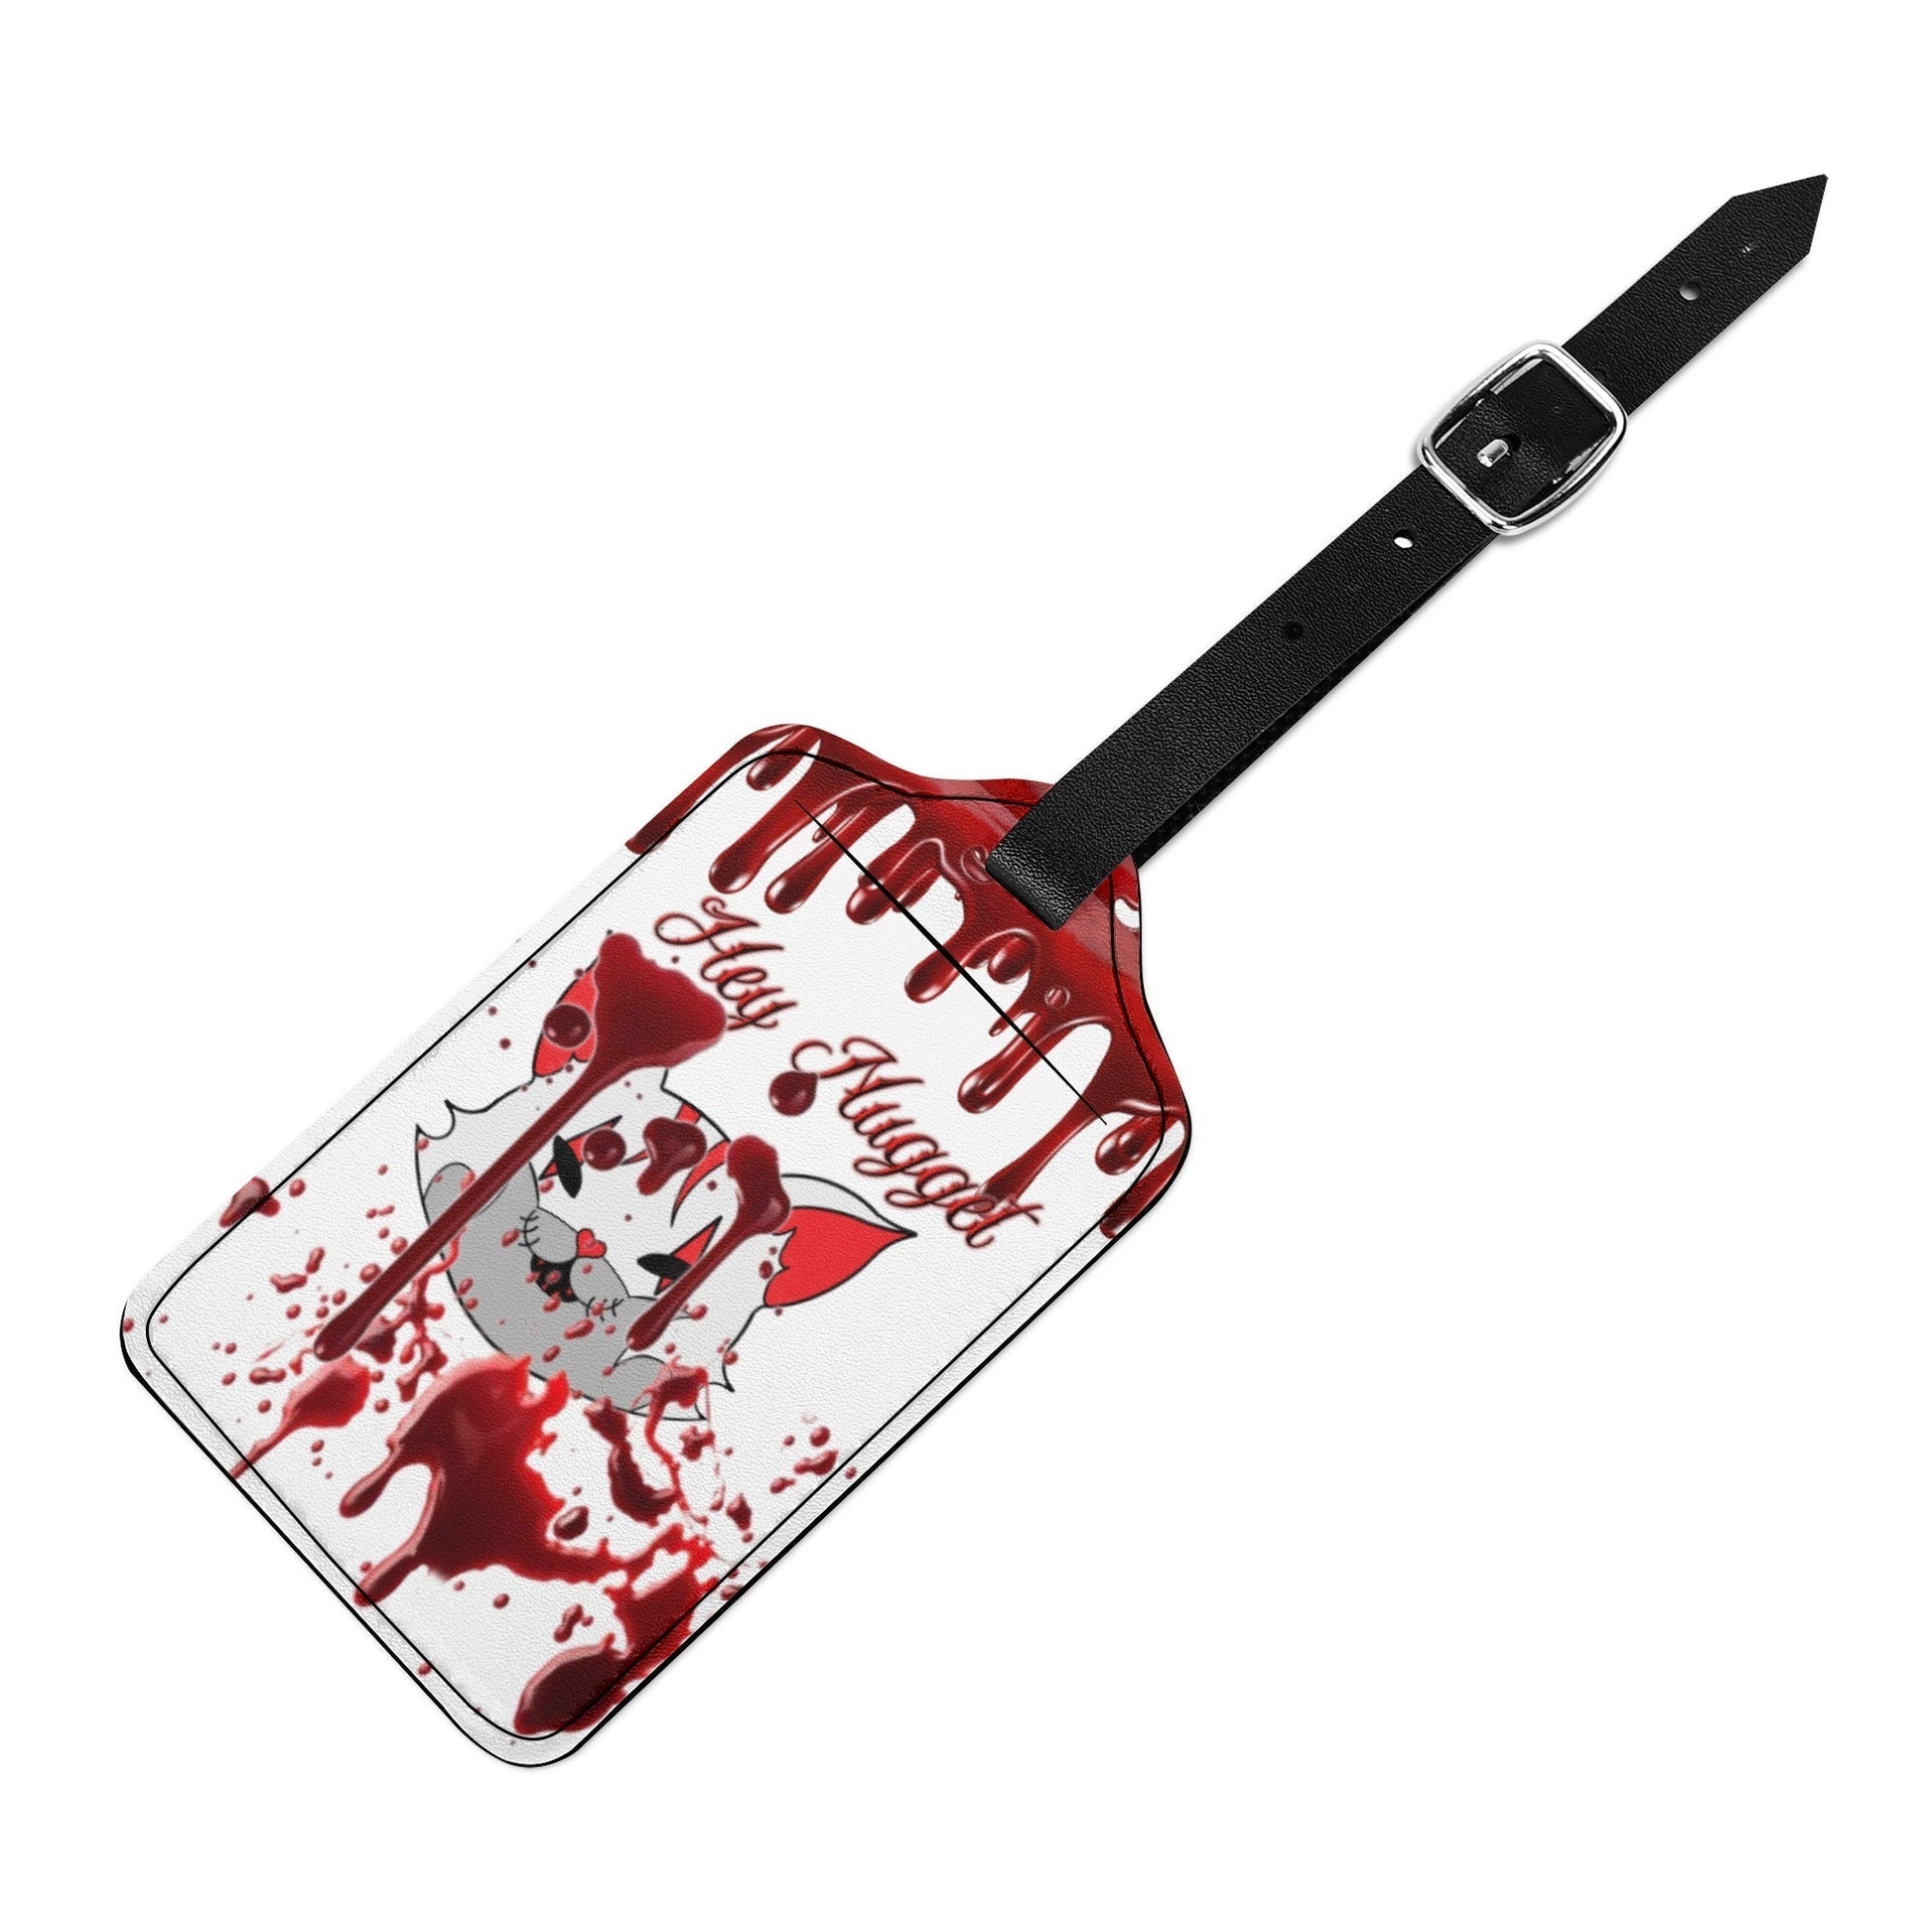 Stand out  with the  My Bloody Nuggieween Luggage Tags  available at Hey Nugget. Grab yours today!